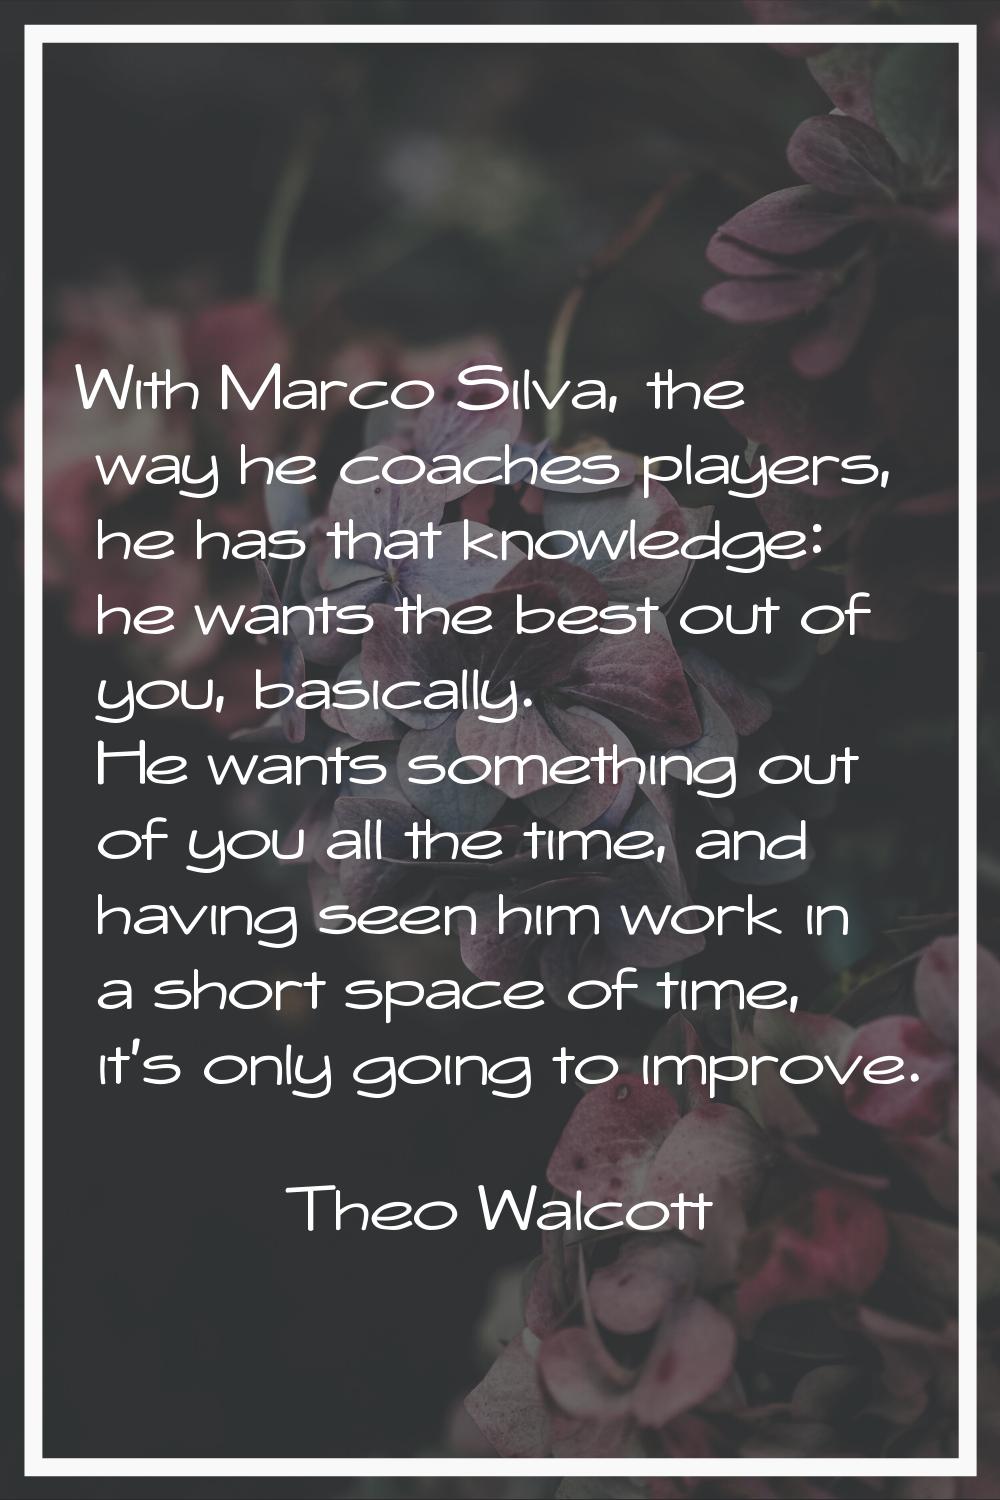 With Marco Silva, the way he coaches players, he has that knowledge: he wants the best out of you, 